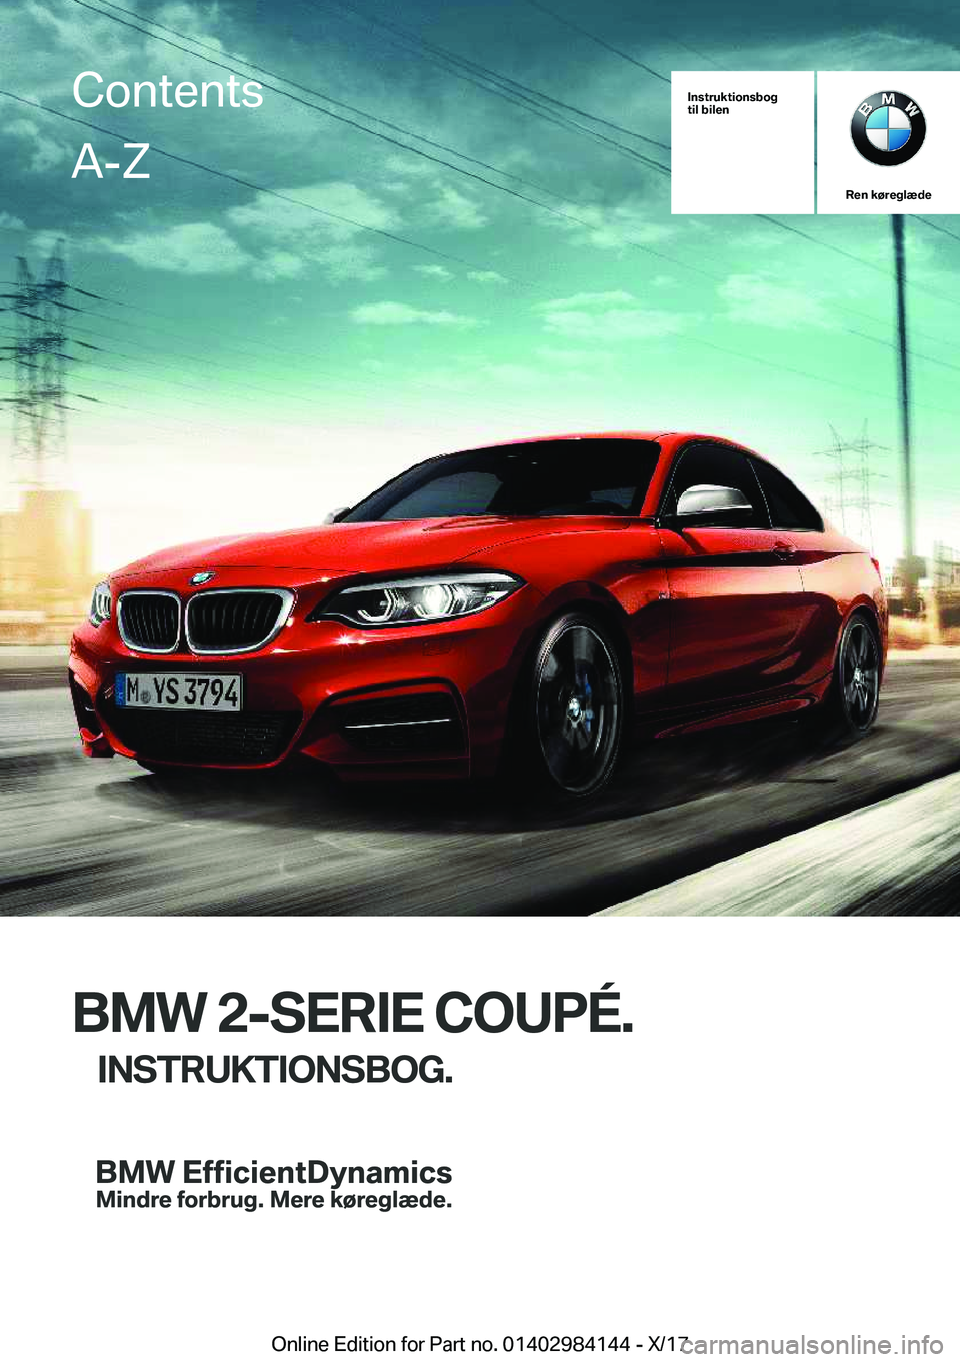 BMW 2 SERIES COUPE 2018  InstruktionsbØger (in Danish) �I�n�s�t�r�u�k�t�i�o�n�s�b�o�g
�t�i�l��b�i�l�e�n
�R�e�n��k�